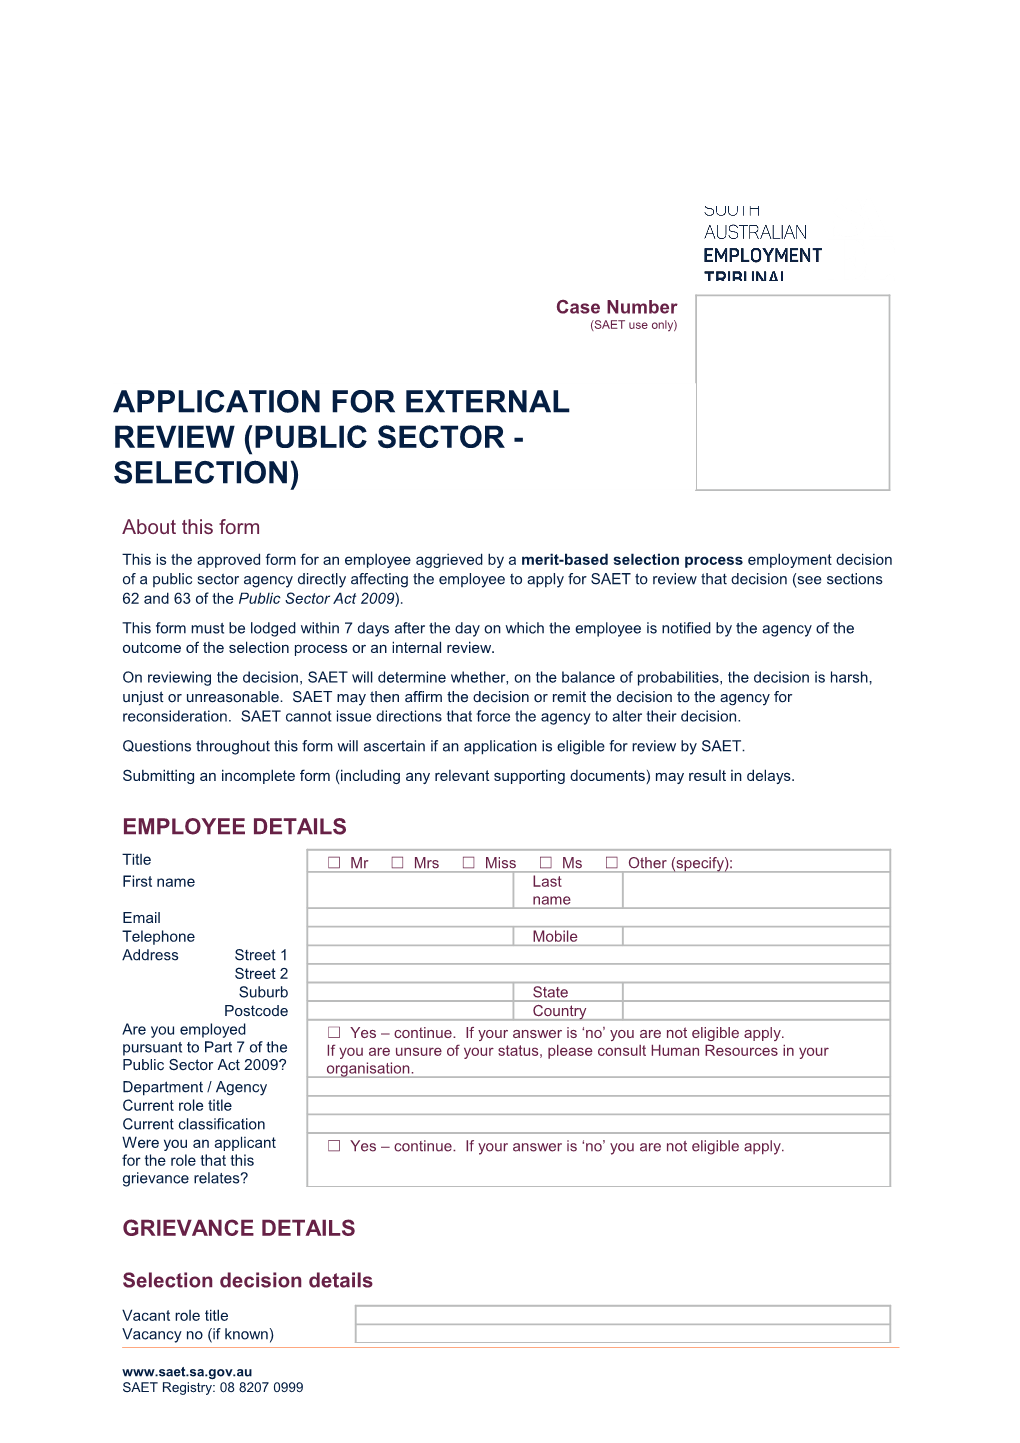 Application for External Review (Public Sector - Selection)